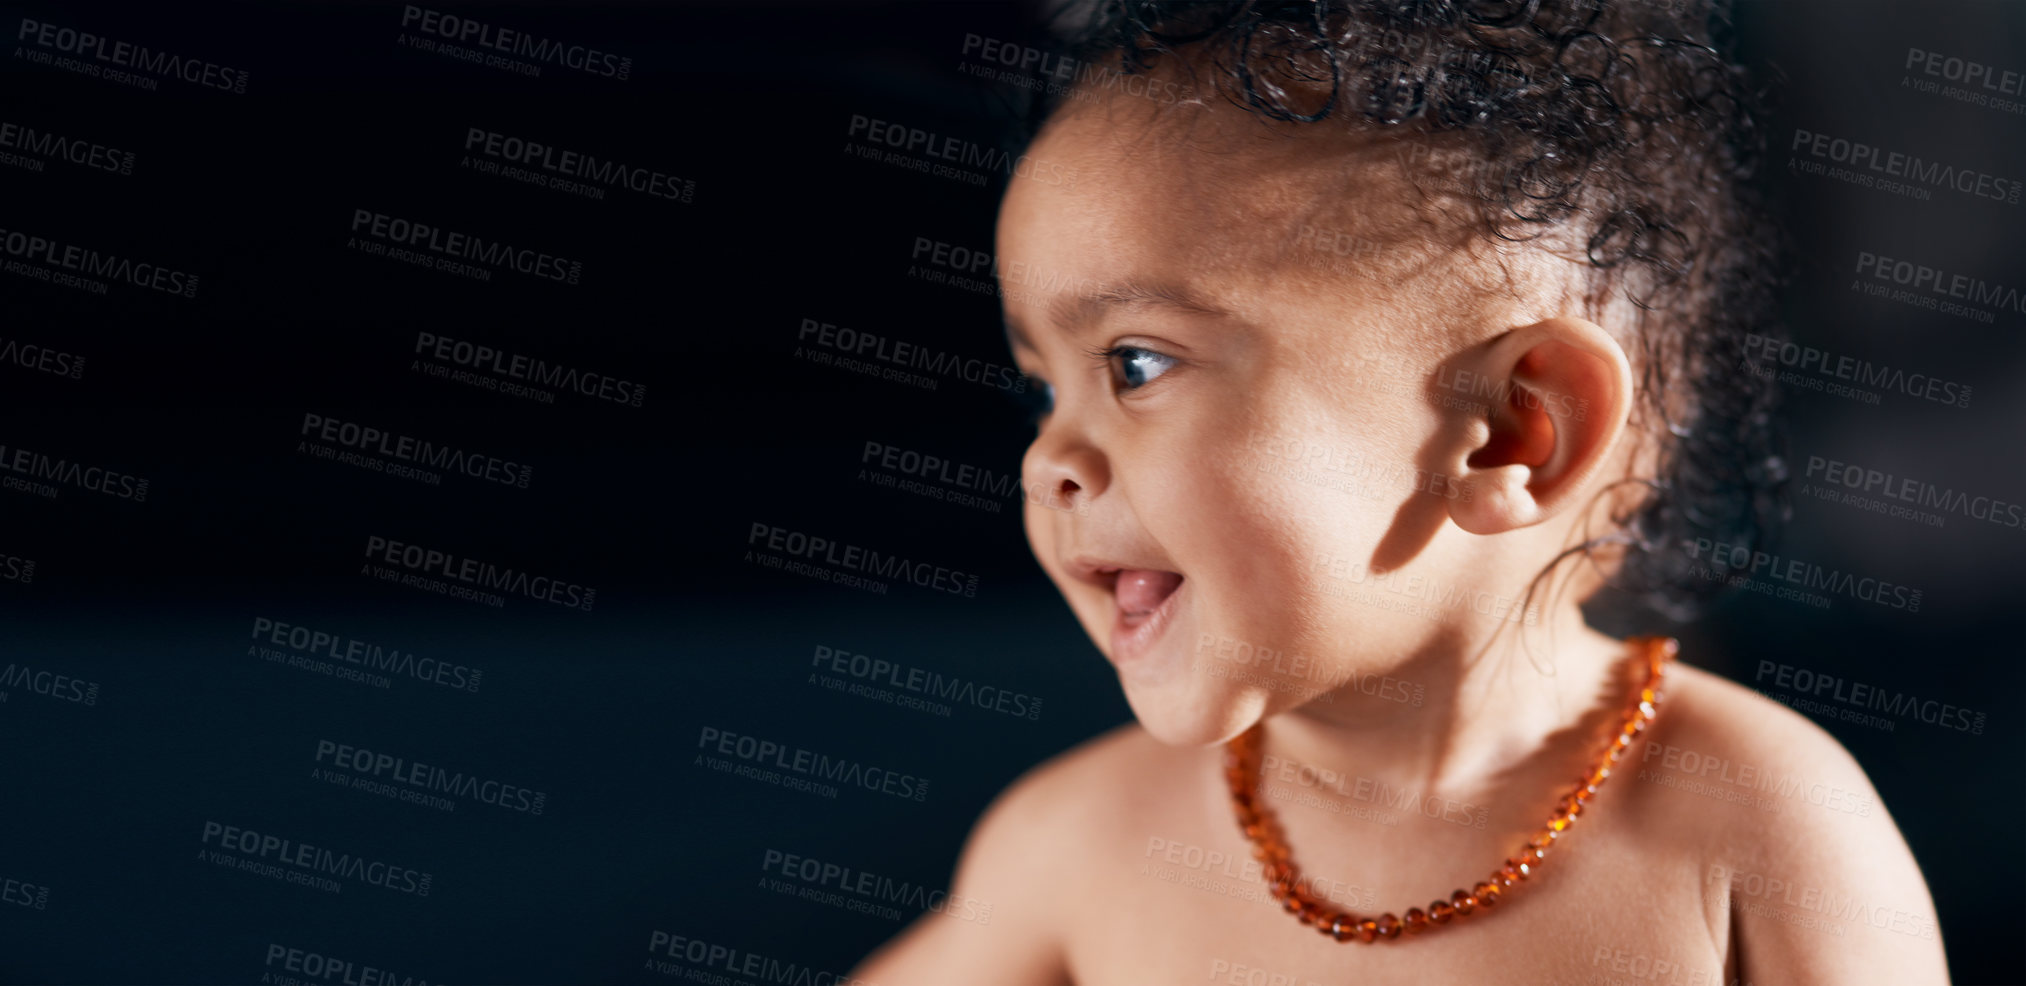 Buy stock photo Studio shot of an adorable baby boy against a black background